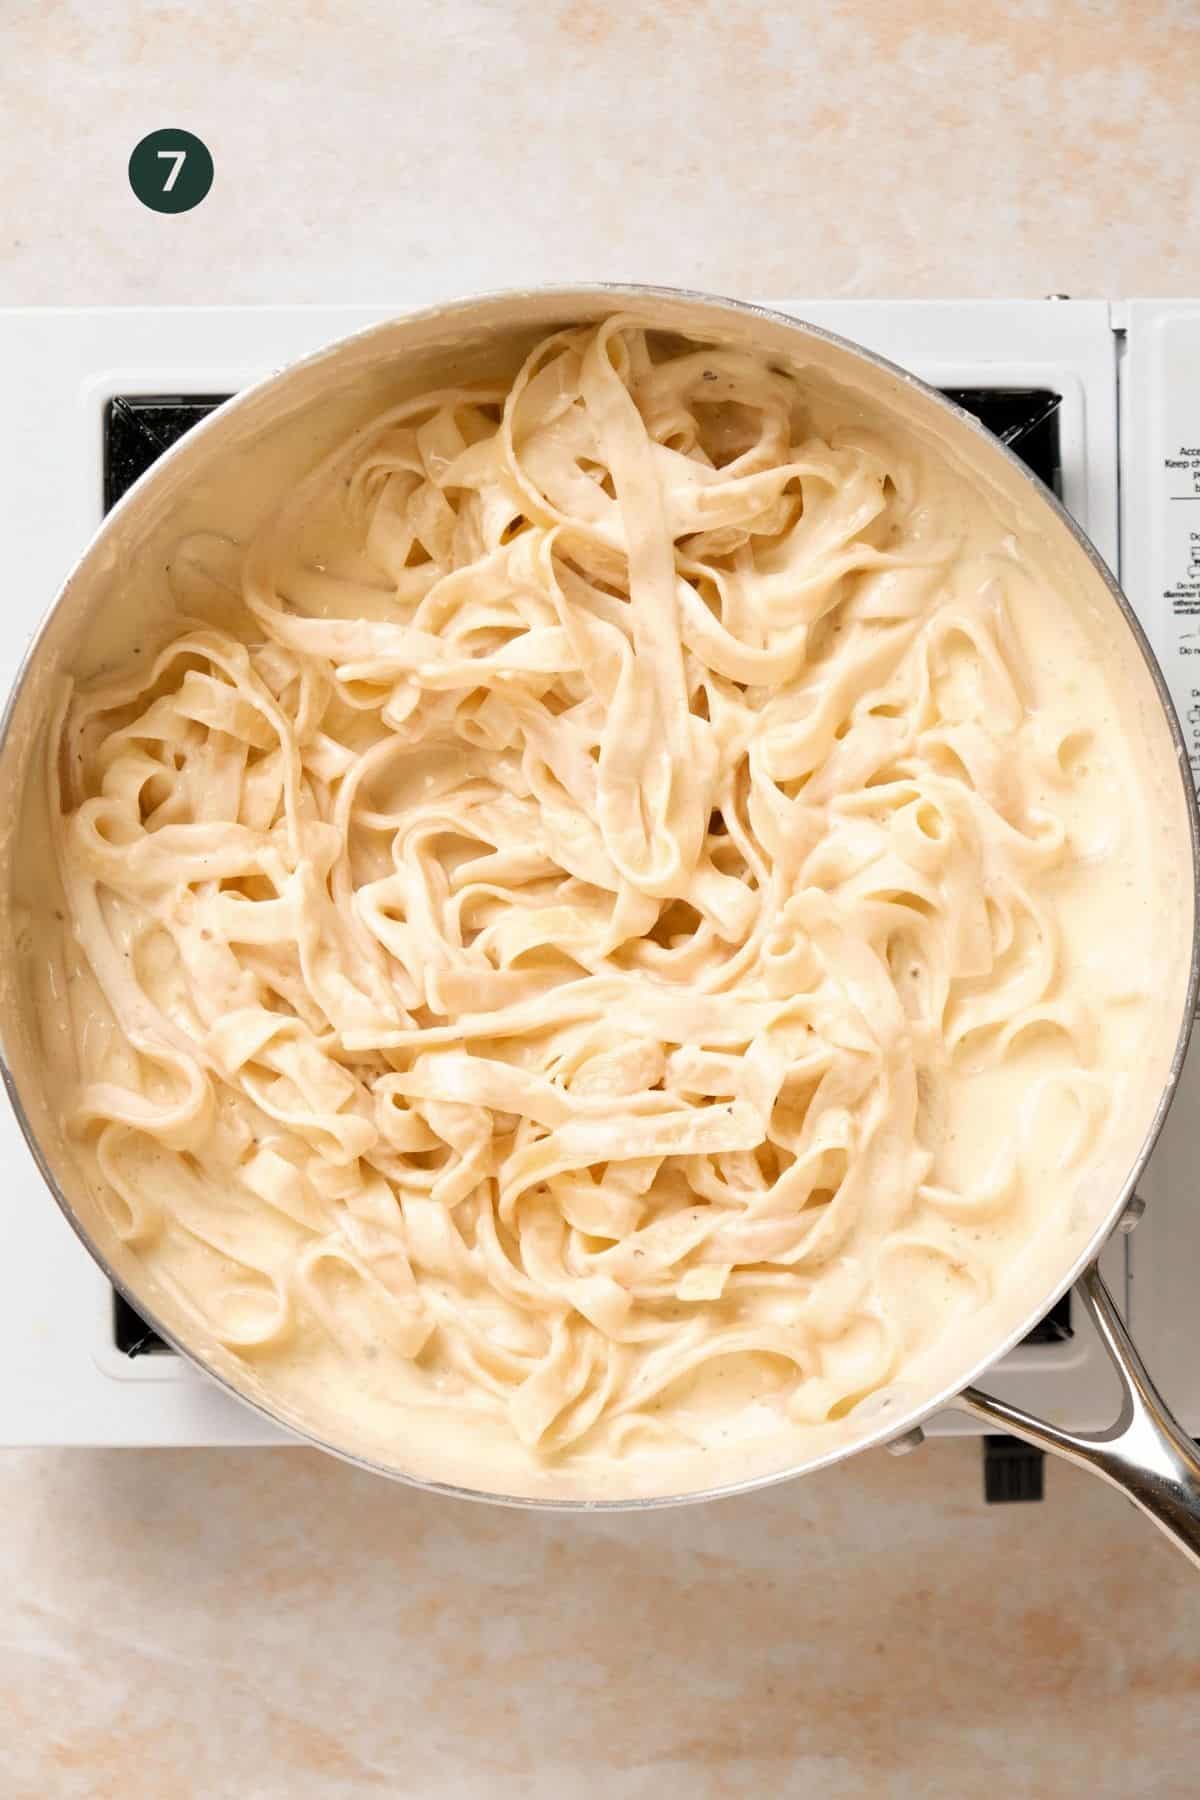 Cooked fettuccine noodles added to alfredo sauce in a skillet.